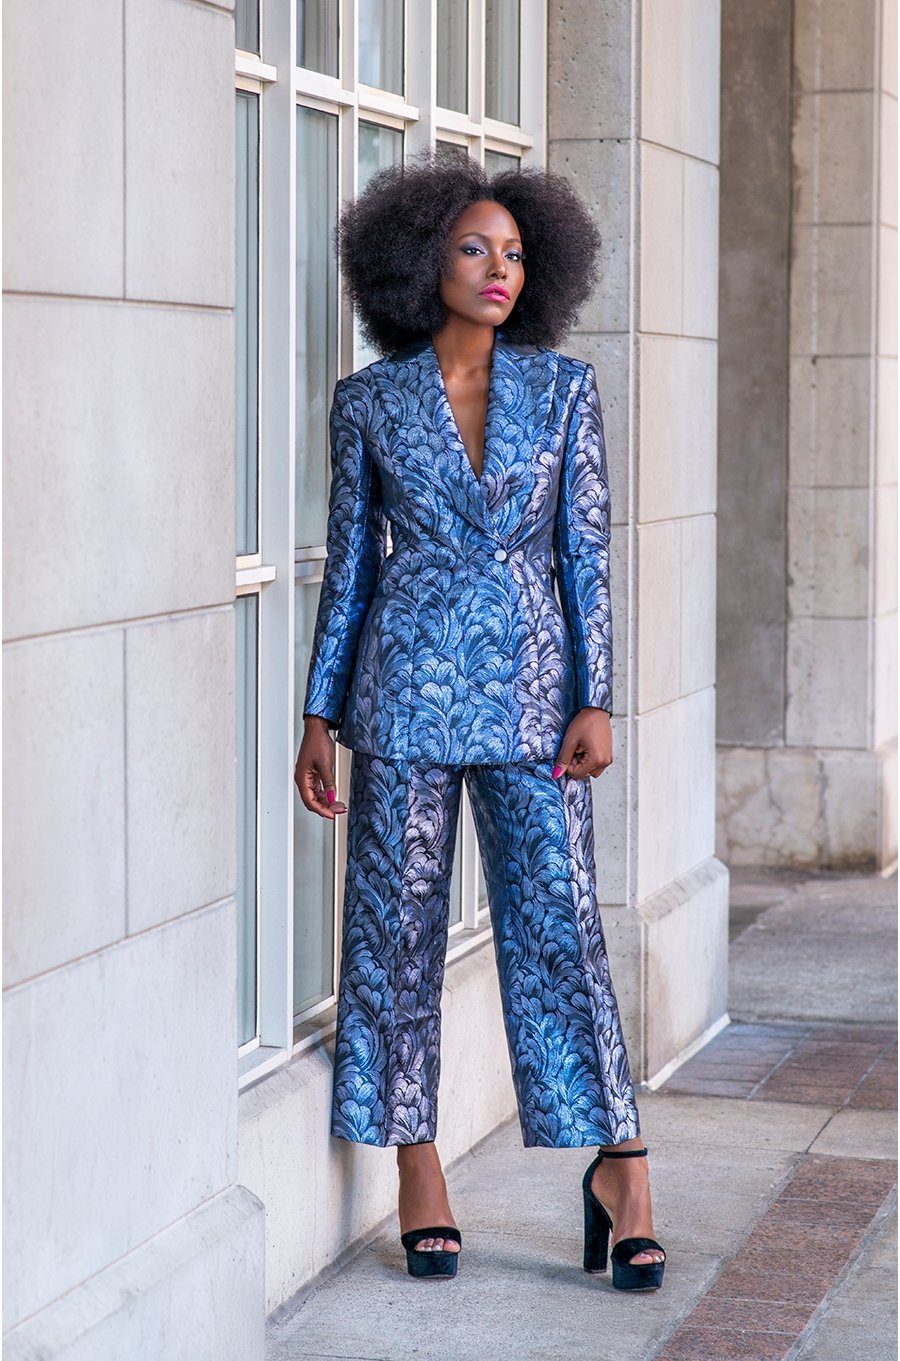 Enyo silver-blue meandering single-breasted suit. Wide leg pants